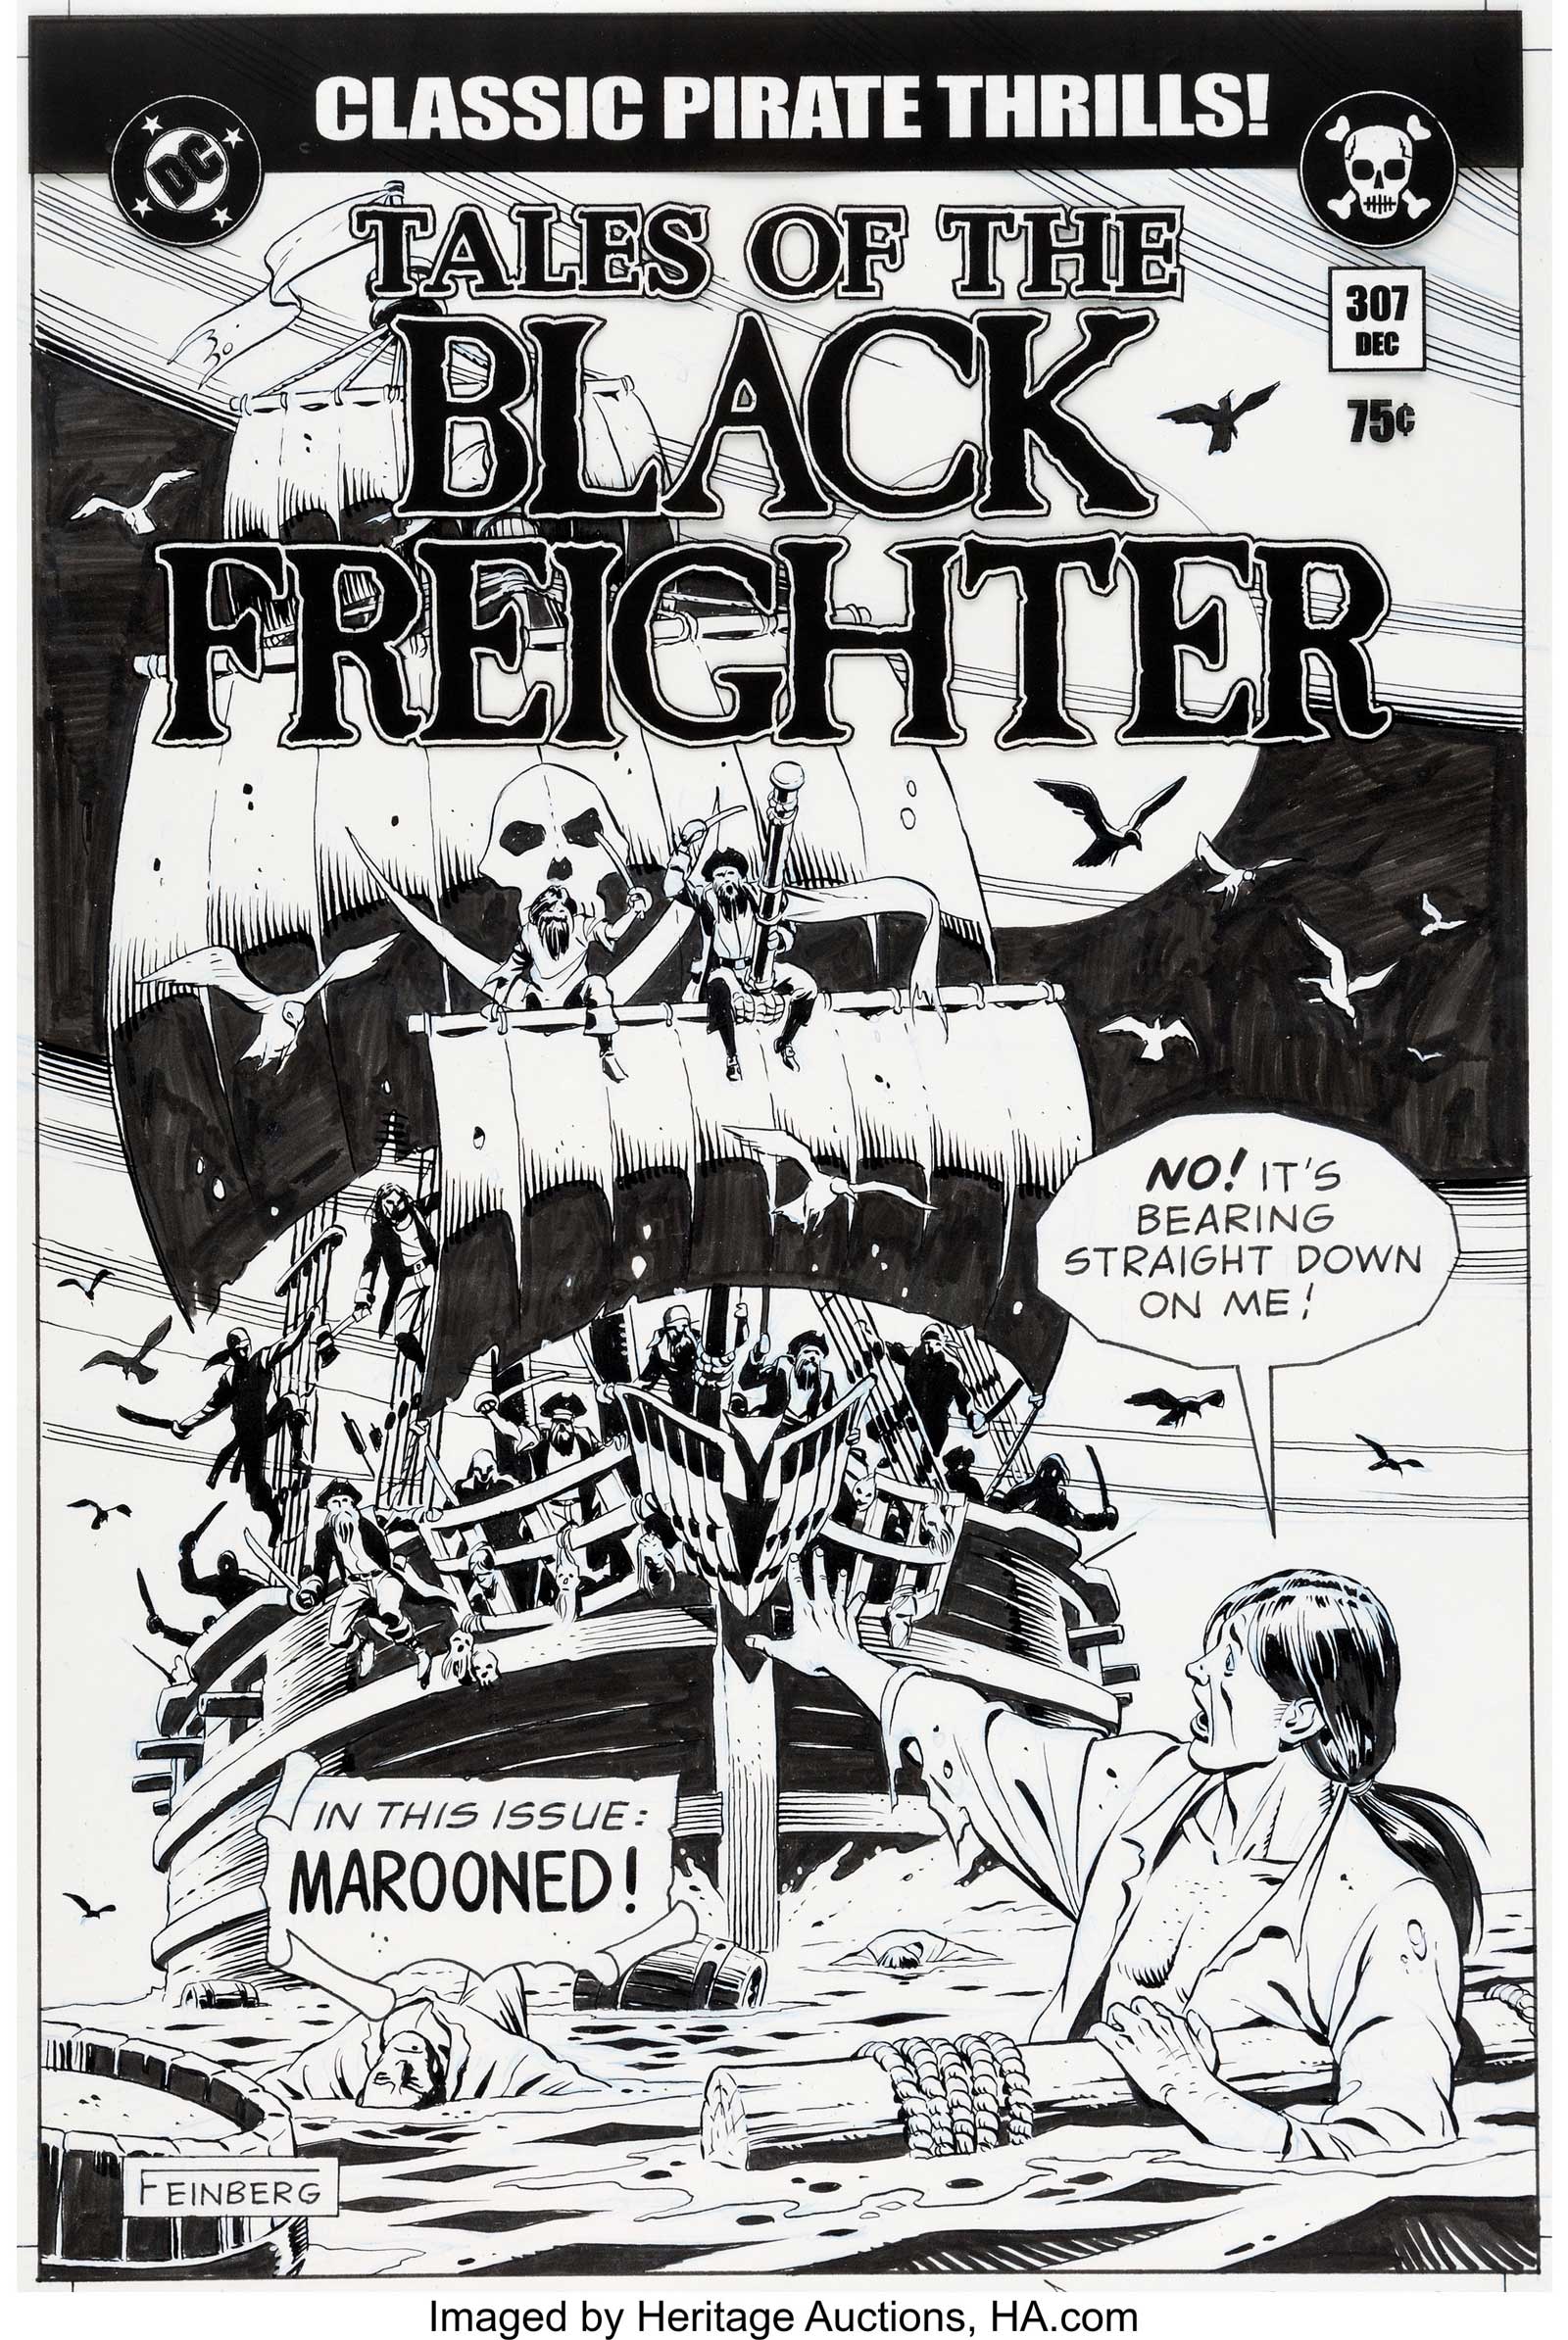 "Tales of the Black Freighter" Prop Comic Cover, by Dave Gibbons